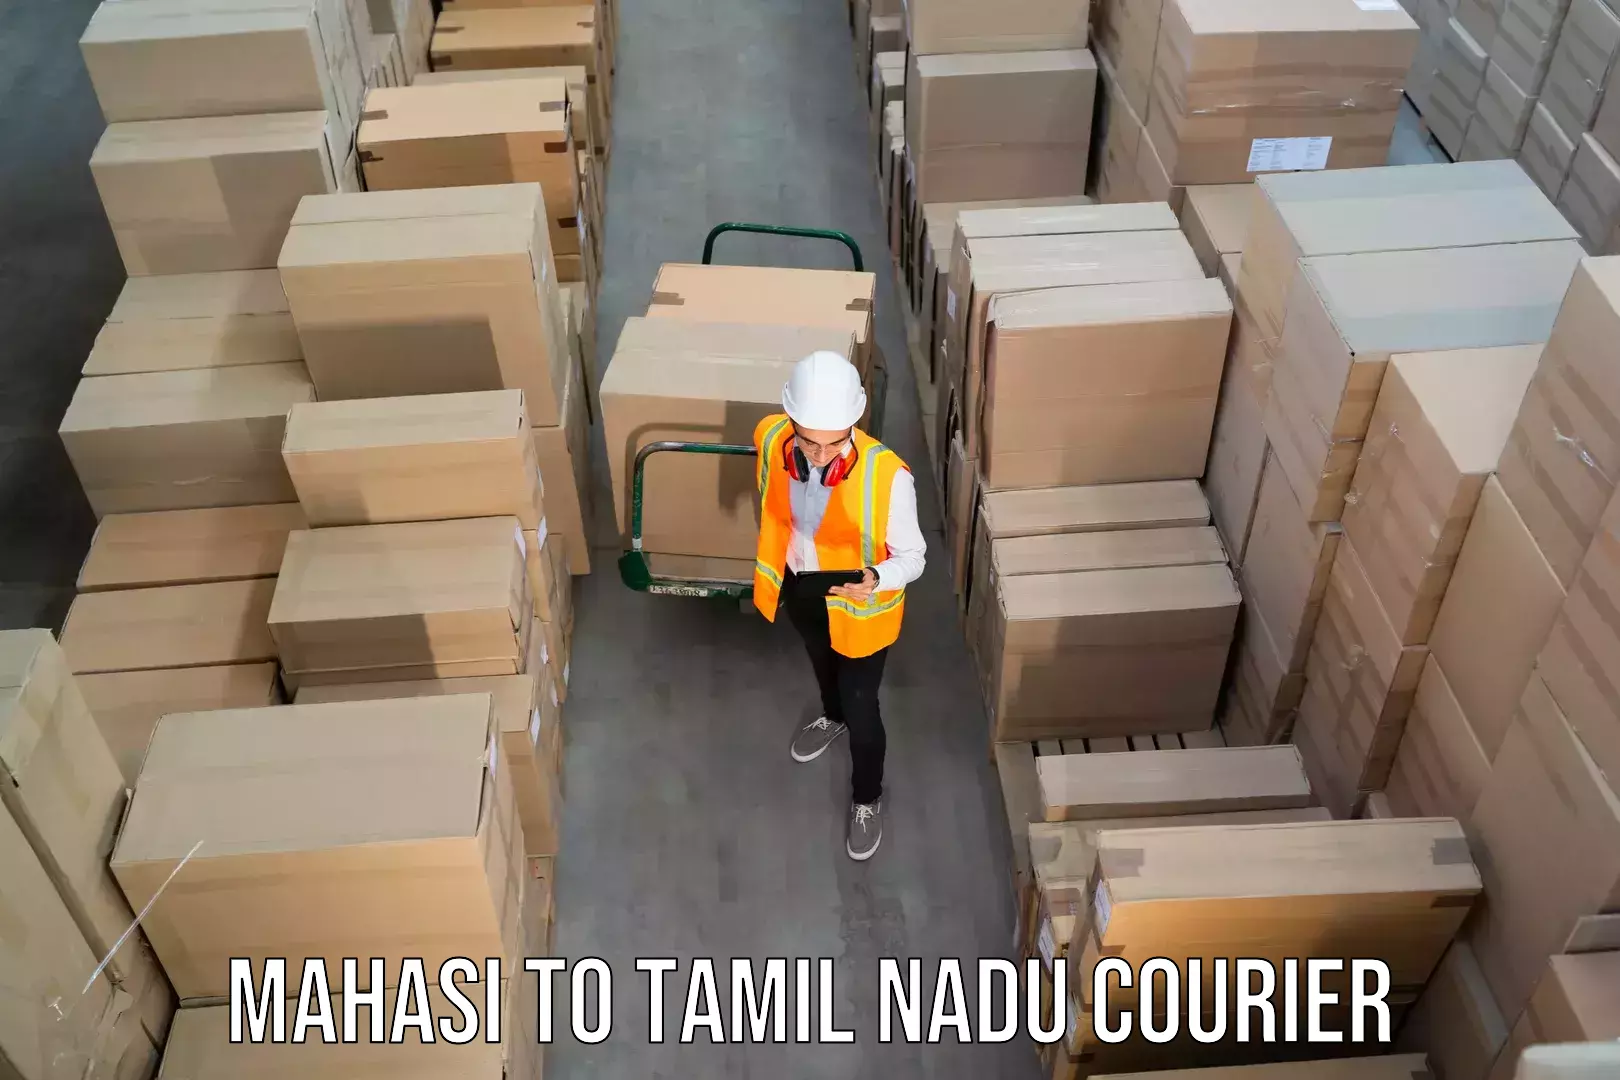 Business delivery service Mahasi to Tamil Nadu